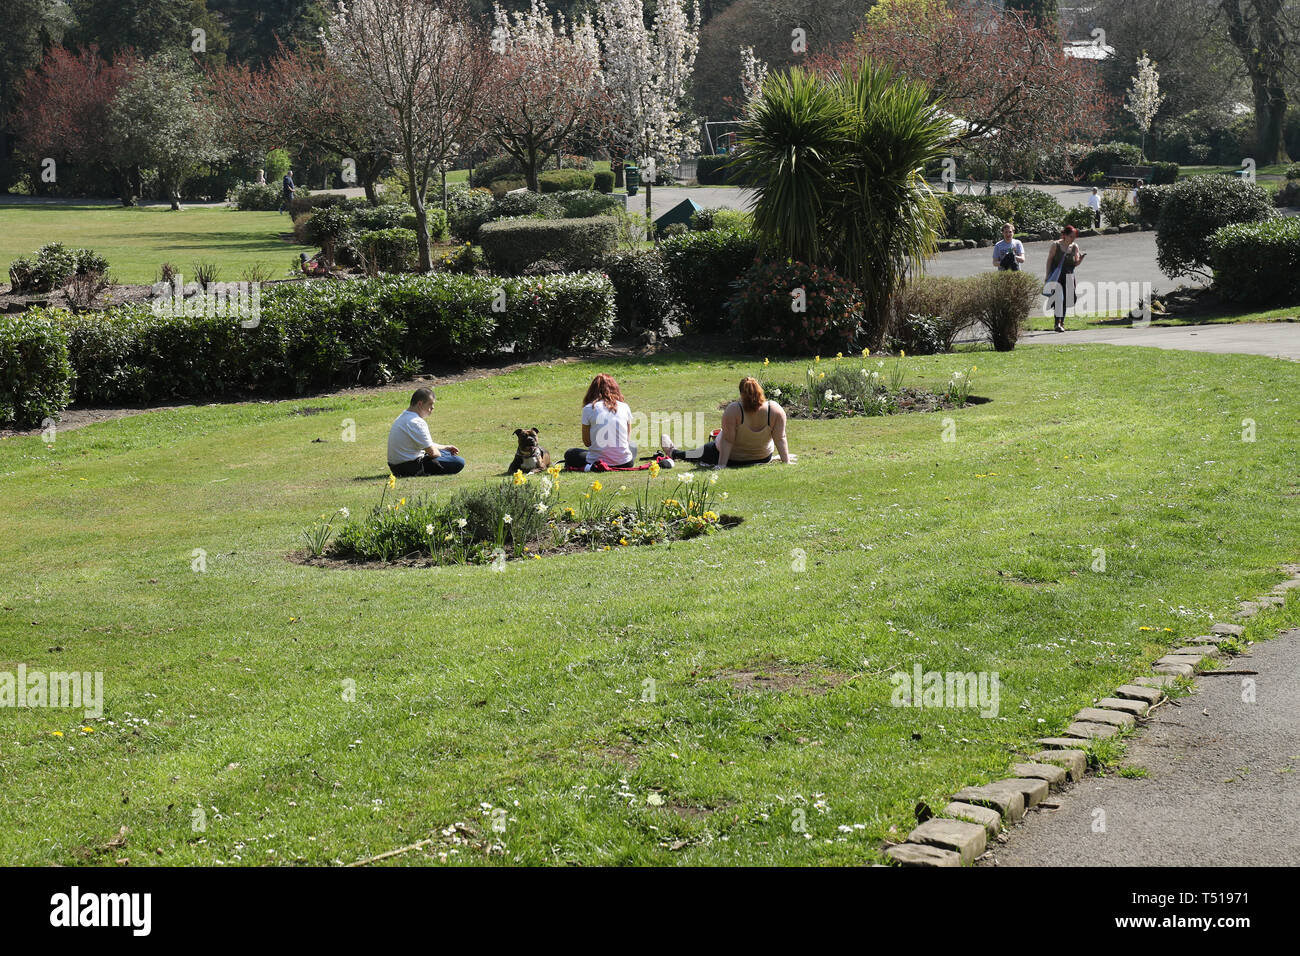 Haworth, West Yorkshire, 19th April 2019 Locals and tourists in the park enjoying the Good Friday holiday break in the sunshine. Stock Photo